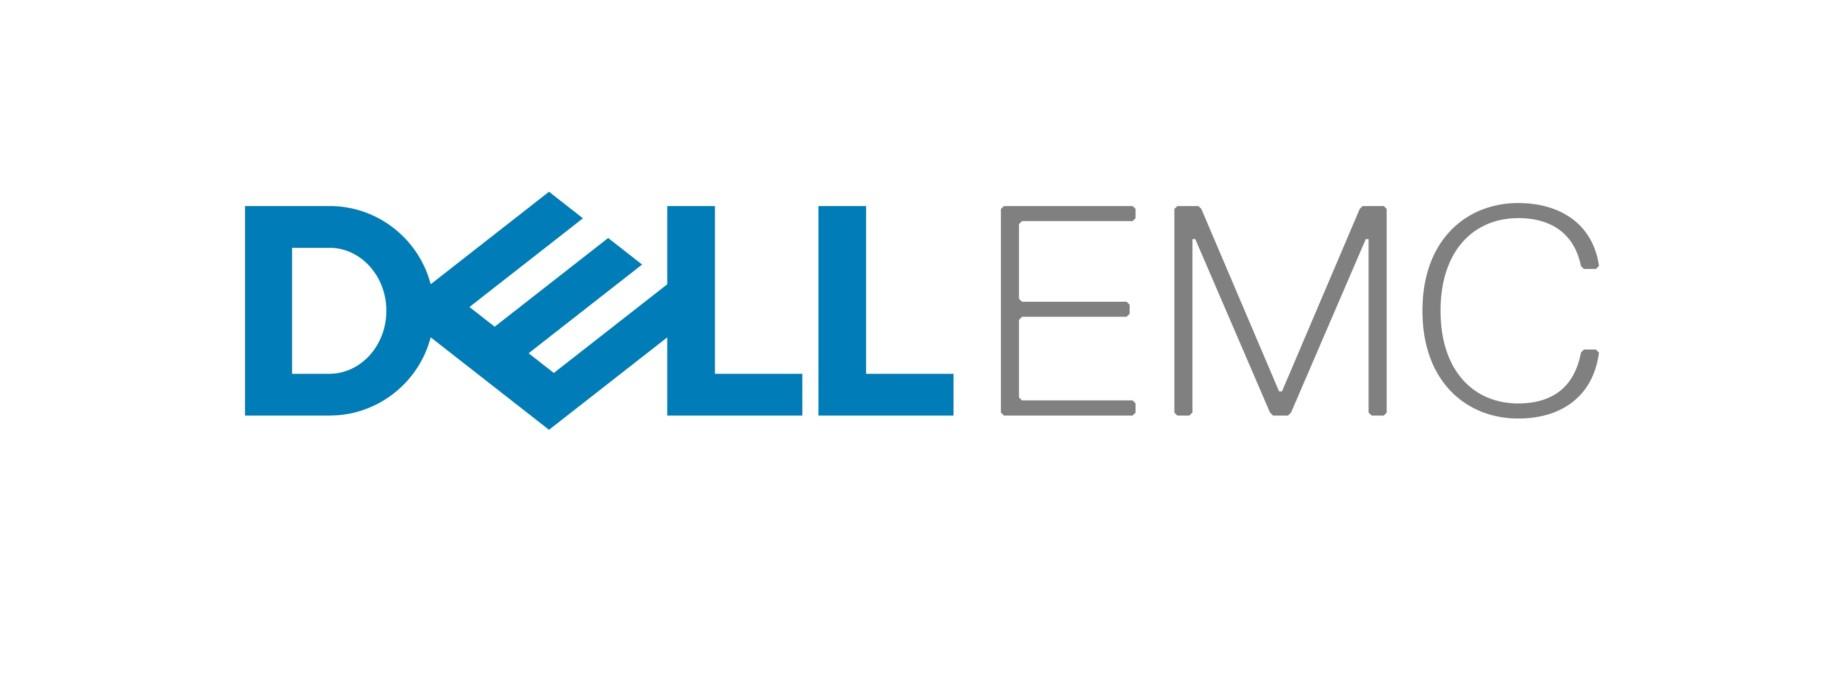 EMC Storage Logo - How Dell EMC Is Displacing HPE Storage in HP Accounts: Case Study